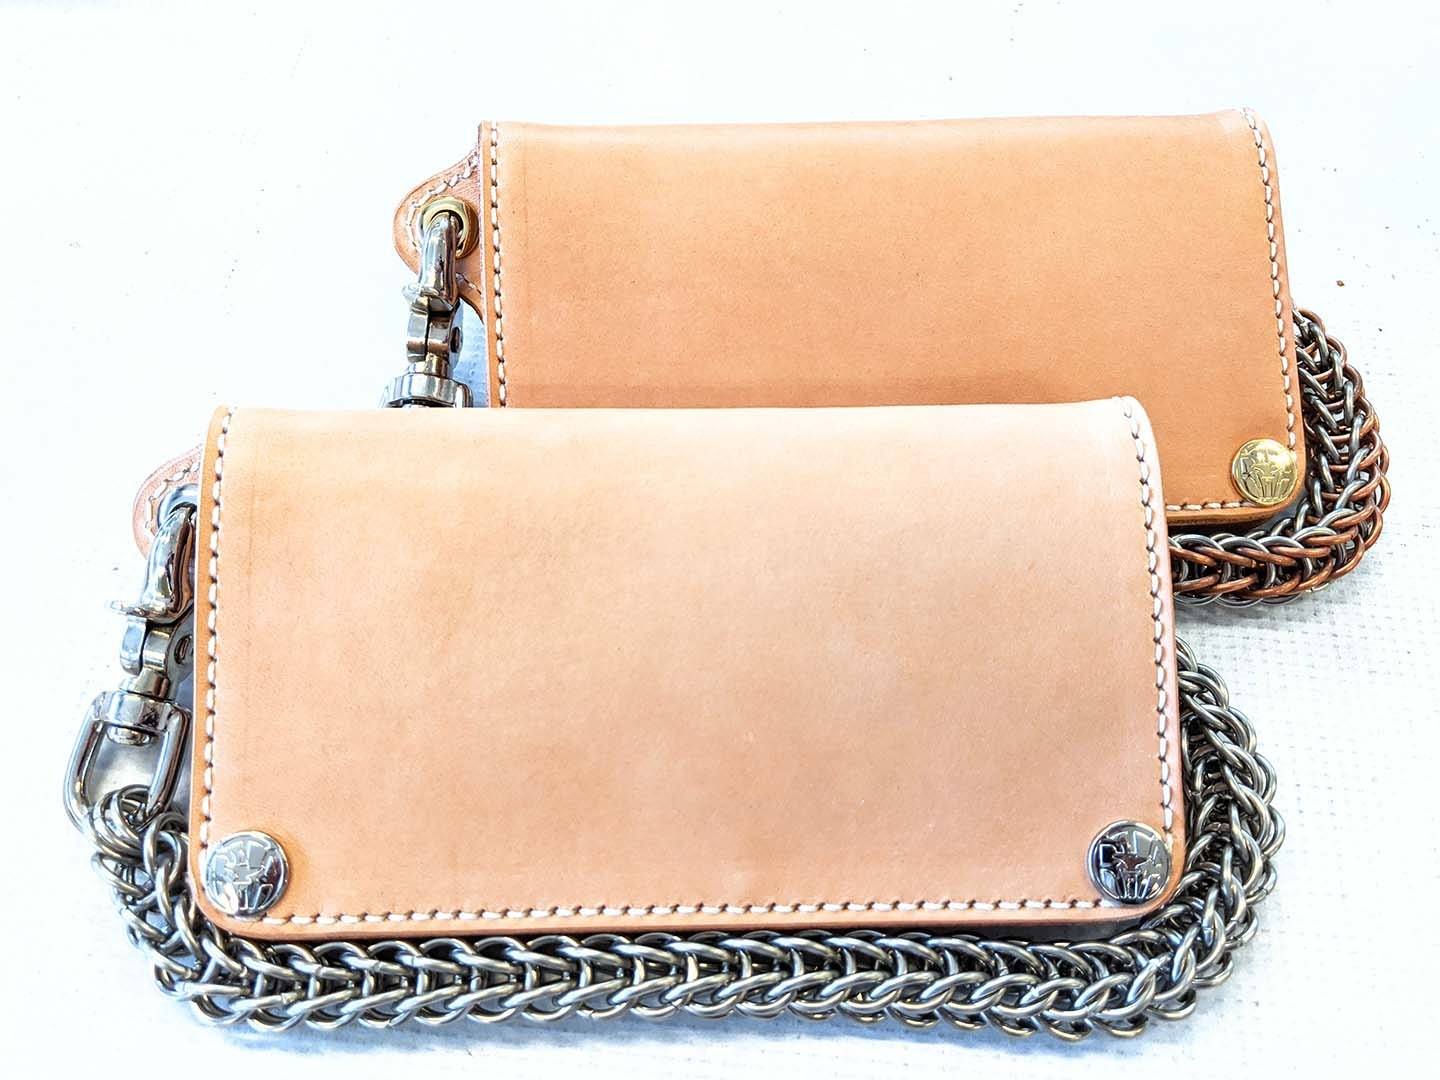 Horsehide Leather Chain Wallet HH81